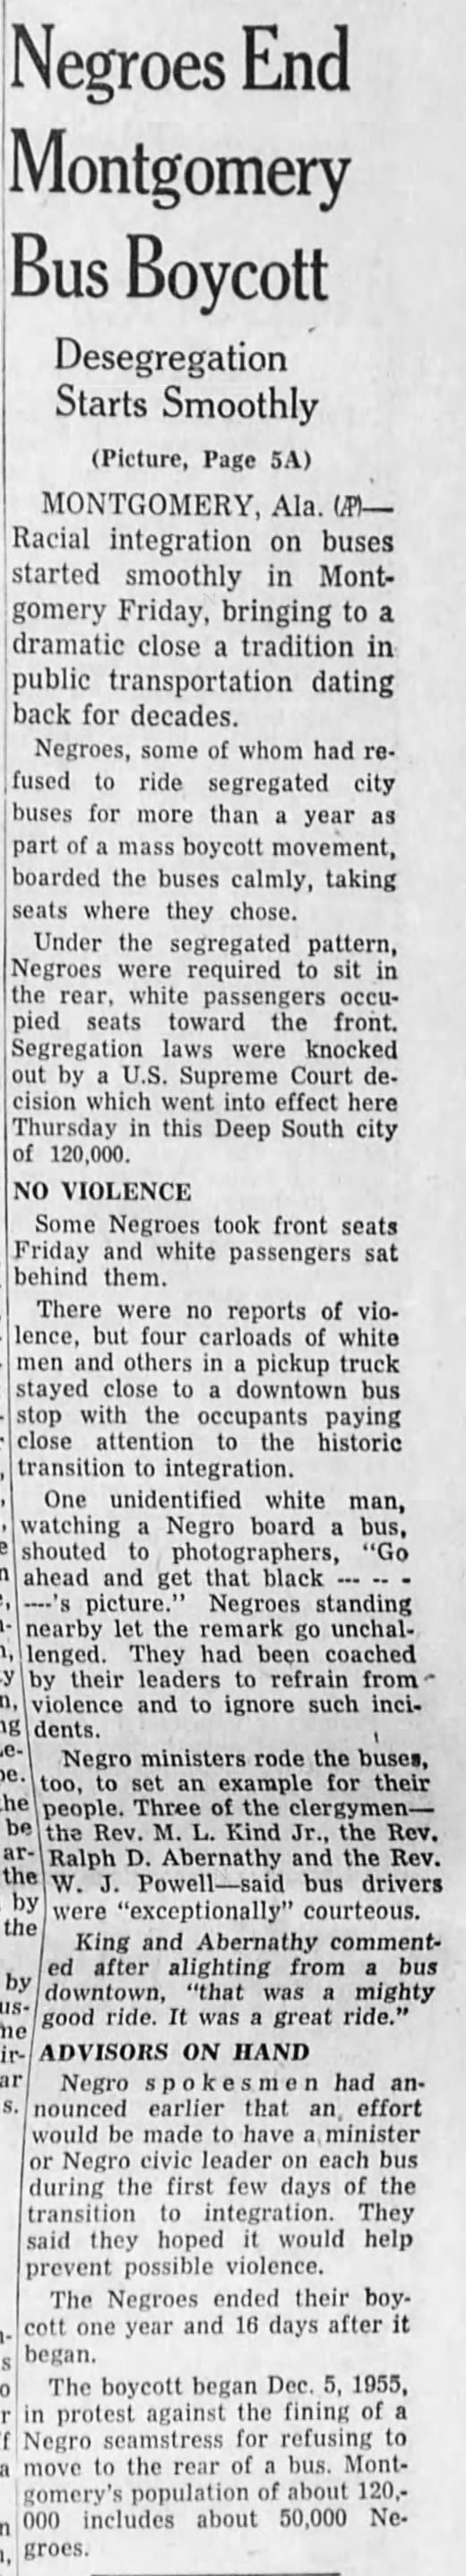 Montgomery Bus Boycott ends December 20, 1956 and desegregation of buses starts "smoothly"